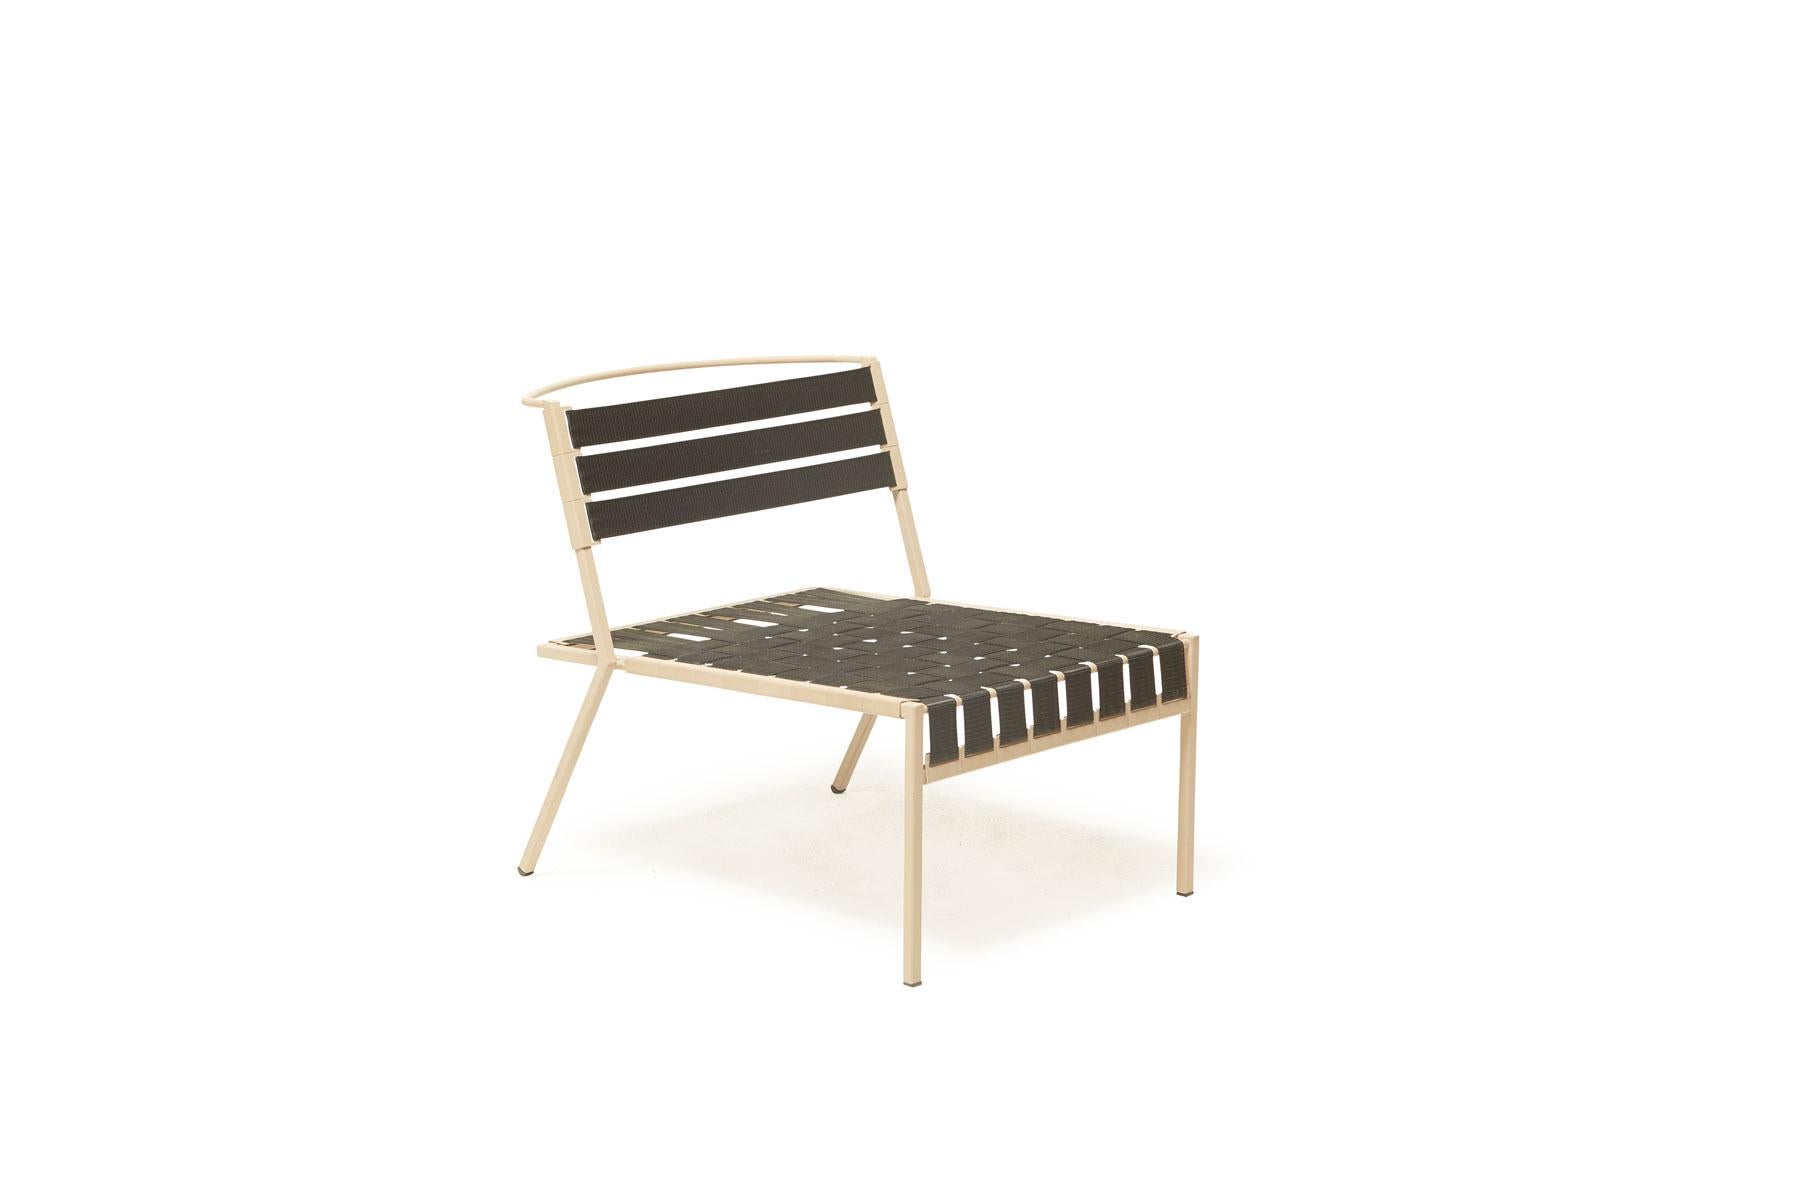 American Black & Tan Outdoor Lounge Chair For Sale